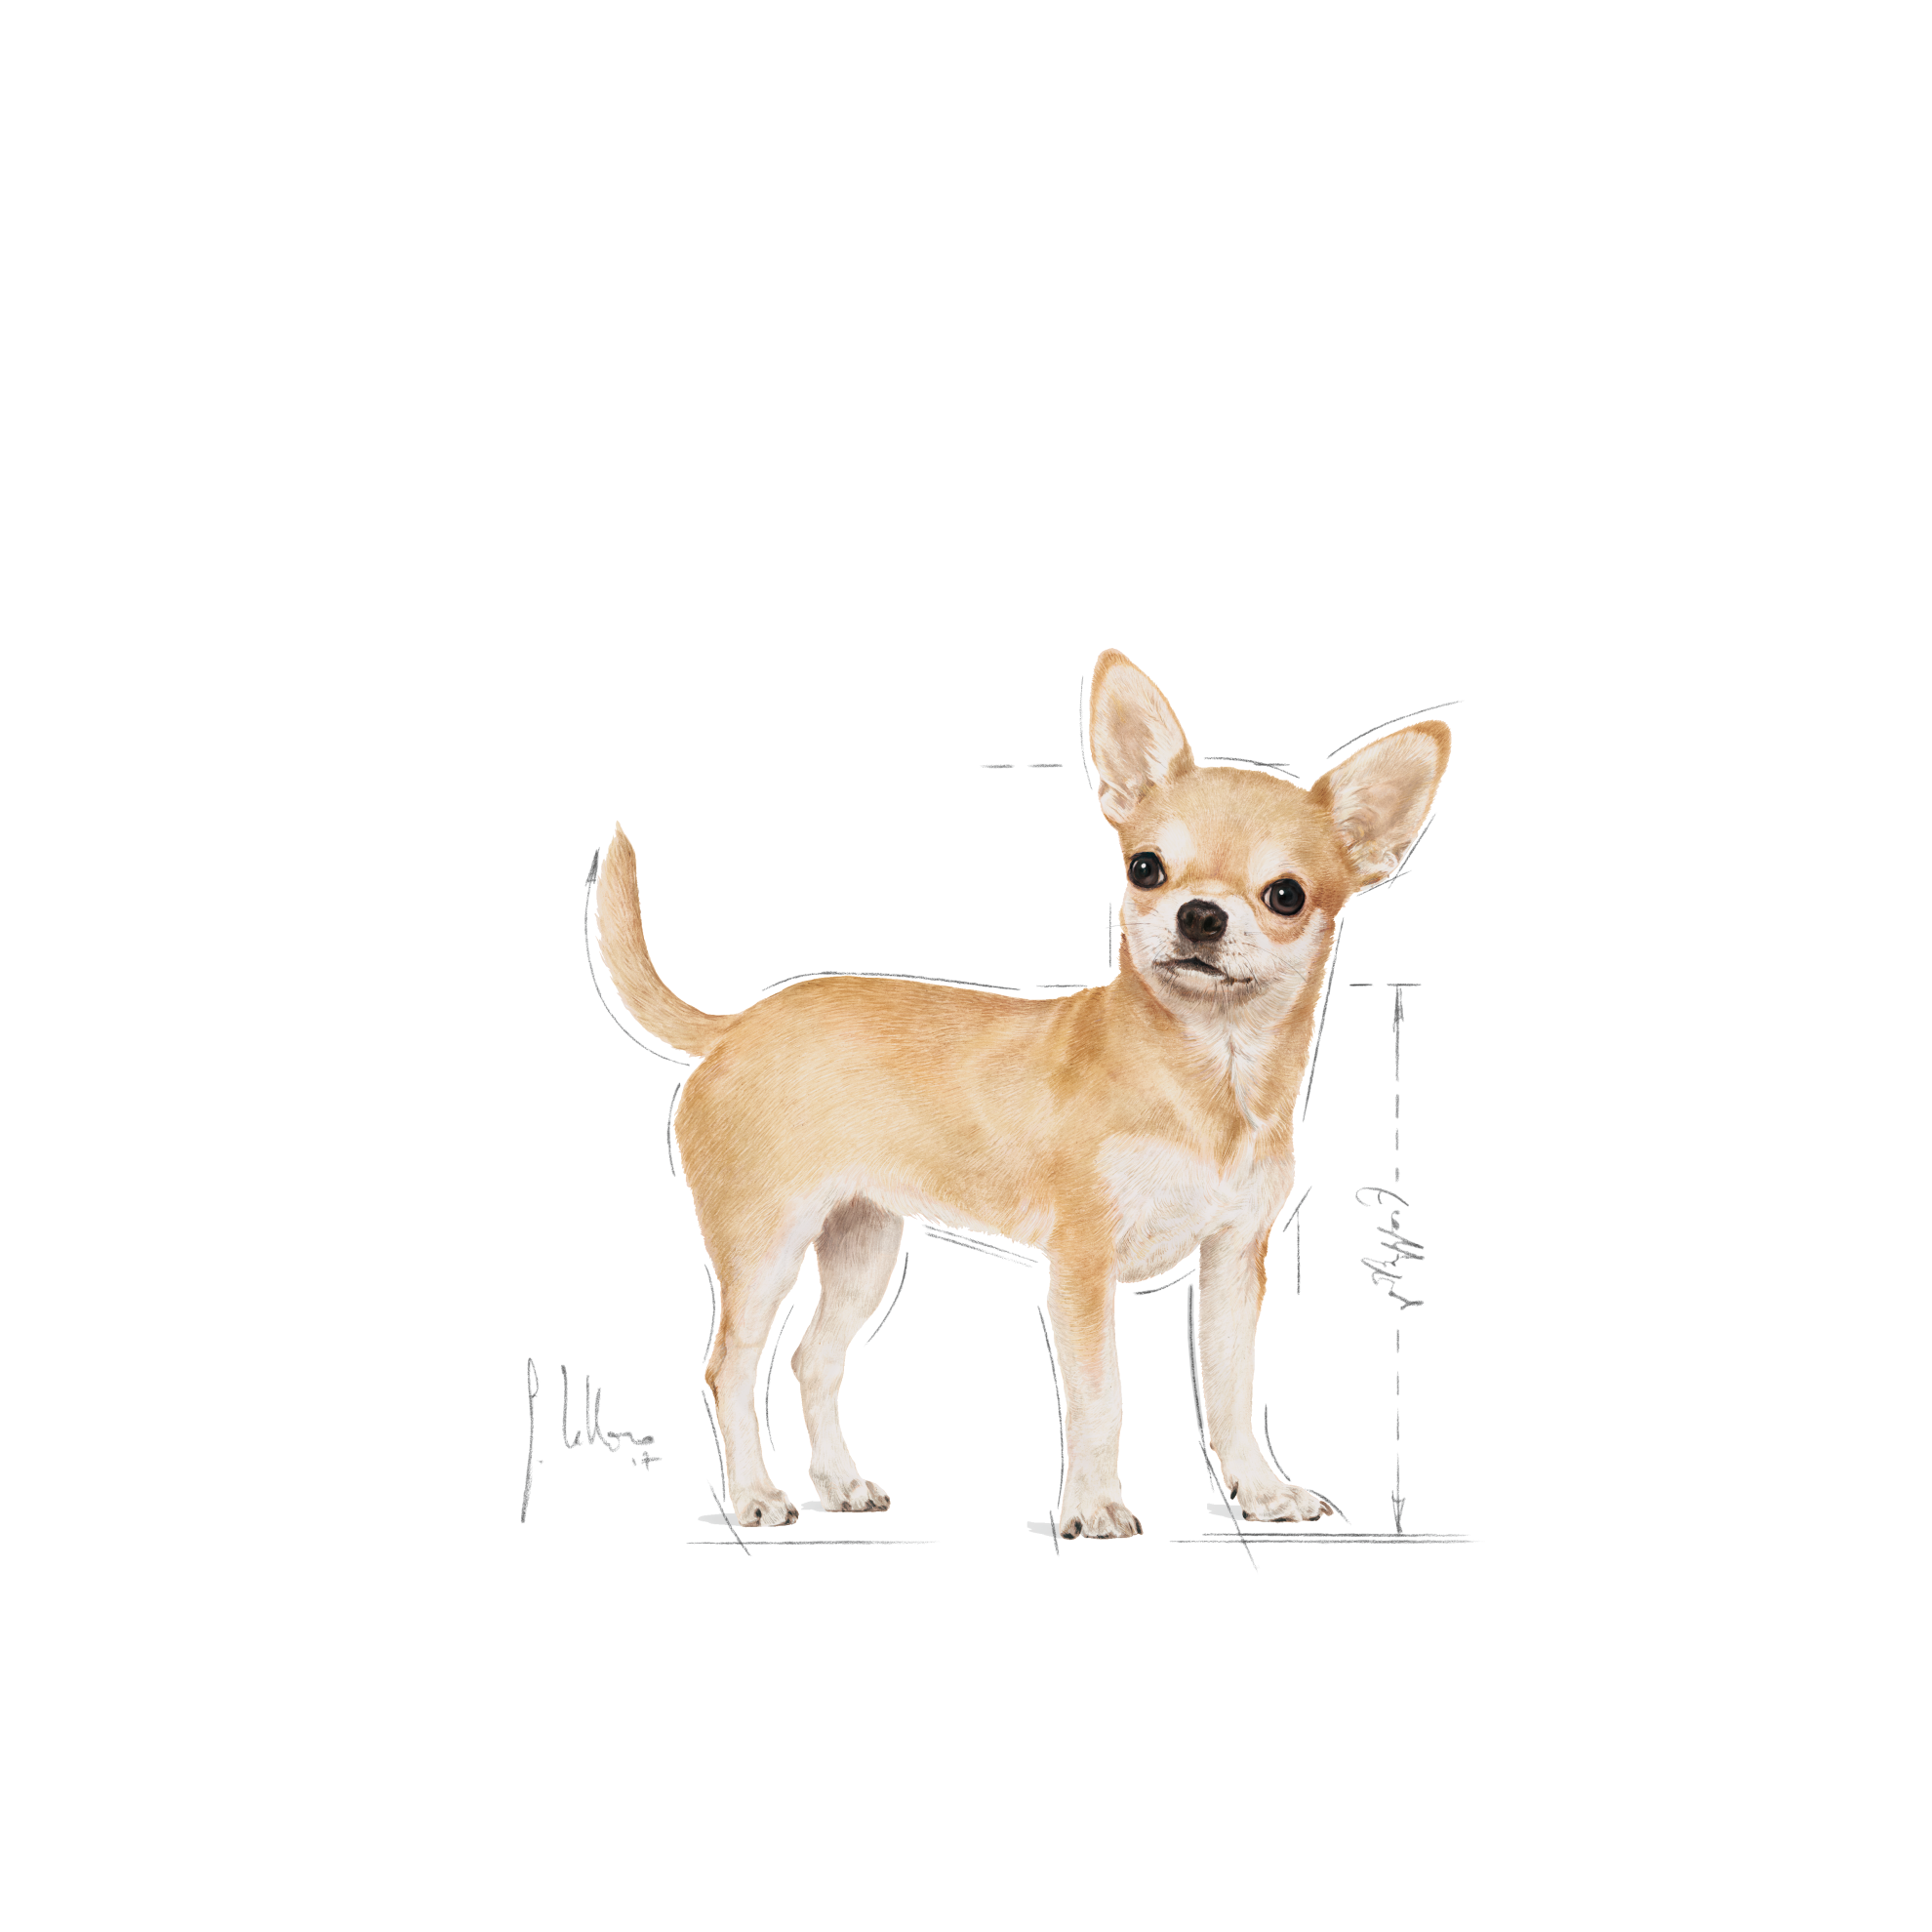 Chihuahua Adult Wet